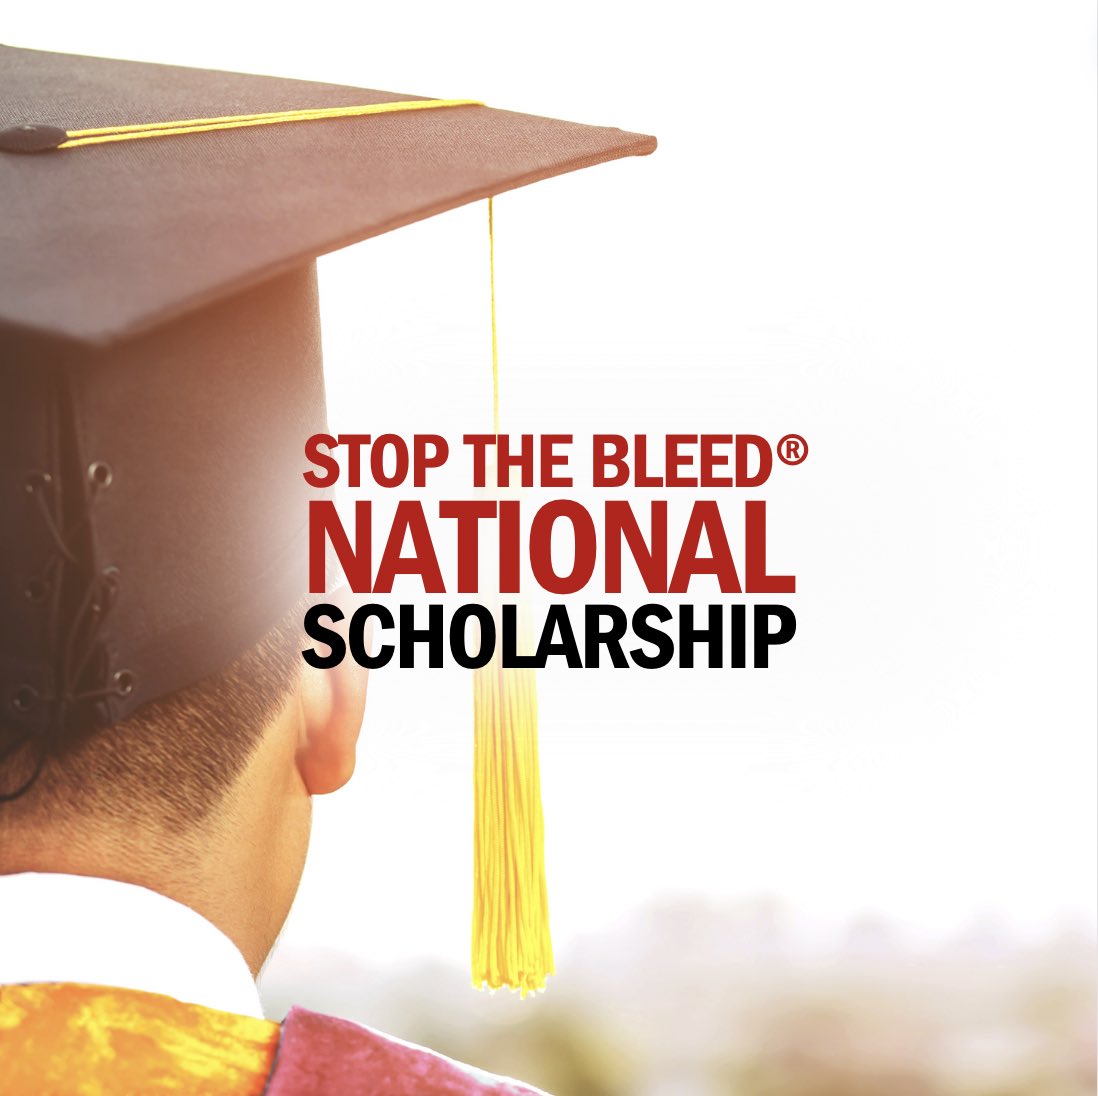 Our National Scholarship is accepting applications until 5/31/24! To apply, write a short essay or film a video explaining how #stopthebleed builds community. Win $$ and free STOP THE BLEED® kits for your school! Open to U.S. High school students. Link in bio for more info.